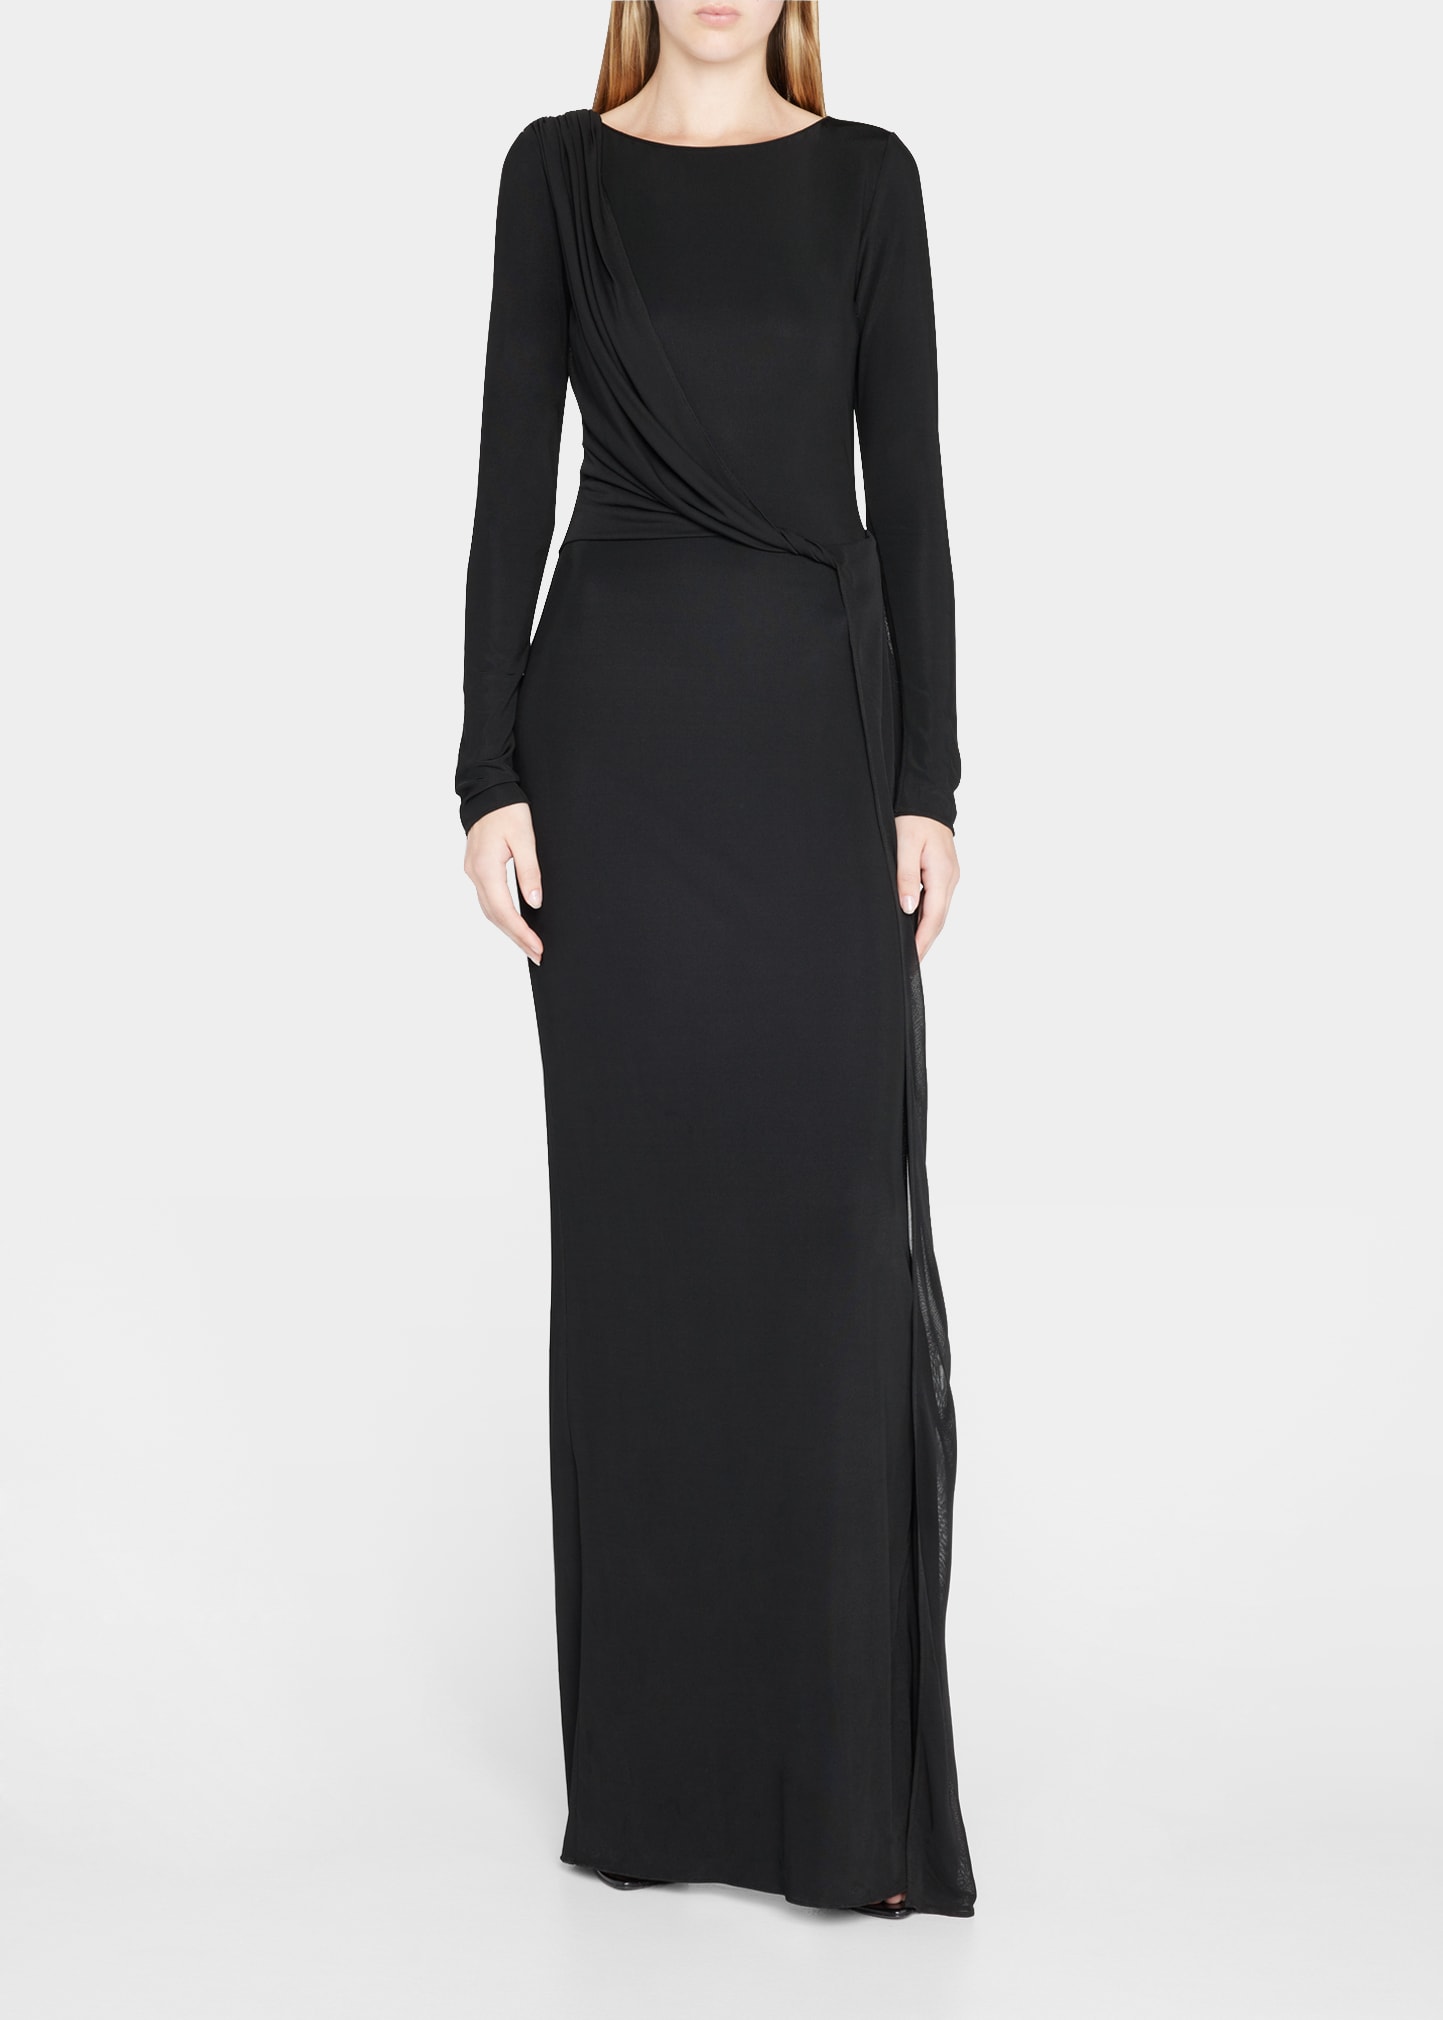 Tom Ford Twisted Drape Column Gown In Black | ModeSens